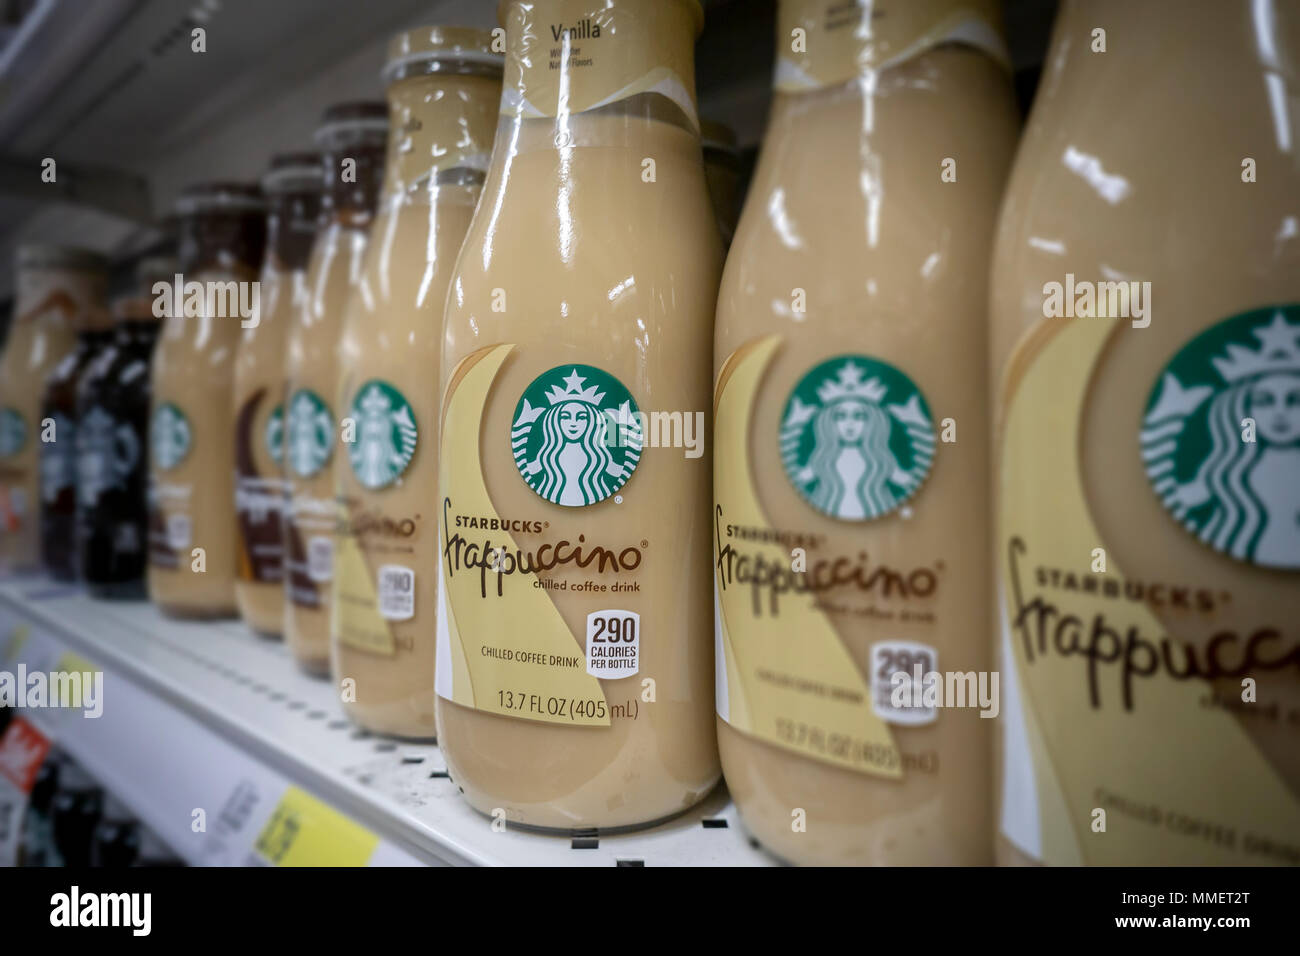 Bottles of Starbucks Frappuccino coffee are seen on a supermarket shelf in New York on Friday, May 4, 2018. NestlŽ is reported to be in talks to purchase Starbucks' grocery business. The units that sell beans and drinks in supermarkets and groceries are involved and not any of the stores. NestlŽ is the world's largest packaged food company. (© Richard B. Levine) Stock Photo